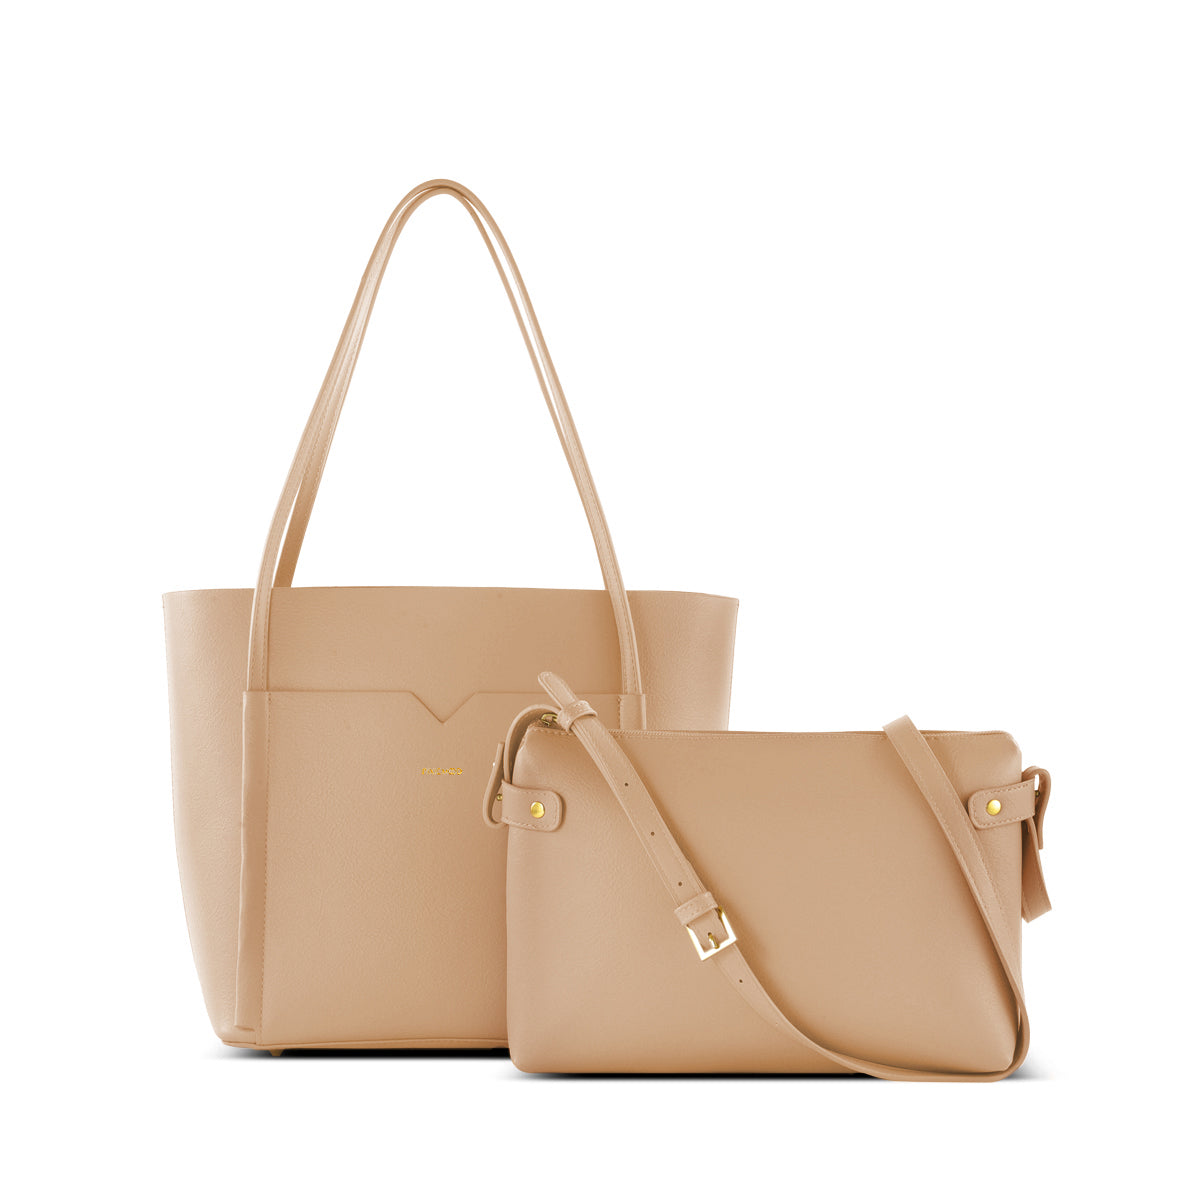 Pixie Mood Clara Tote  An everyday tote bag that makes carrying all of your belongings a total breeze.